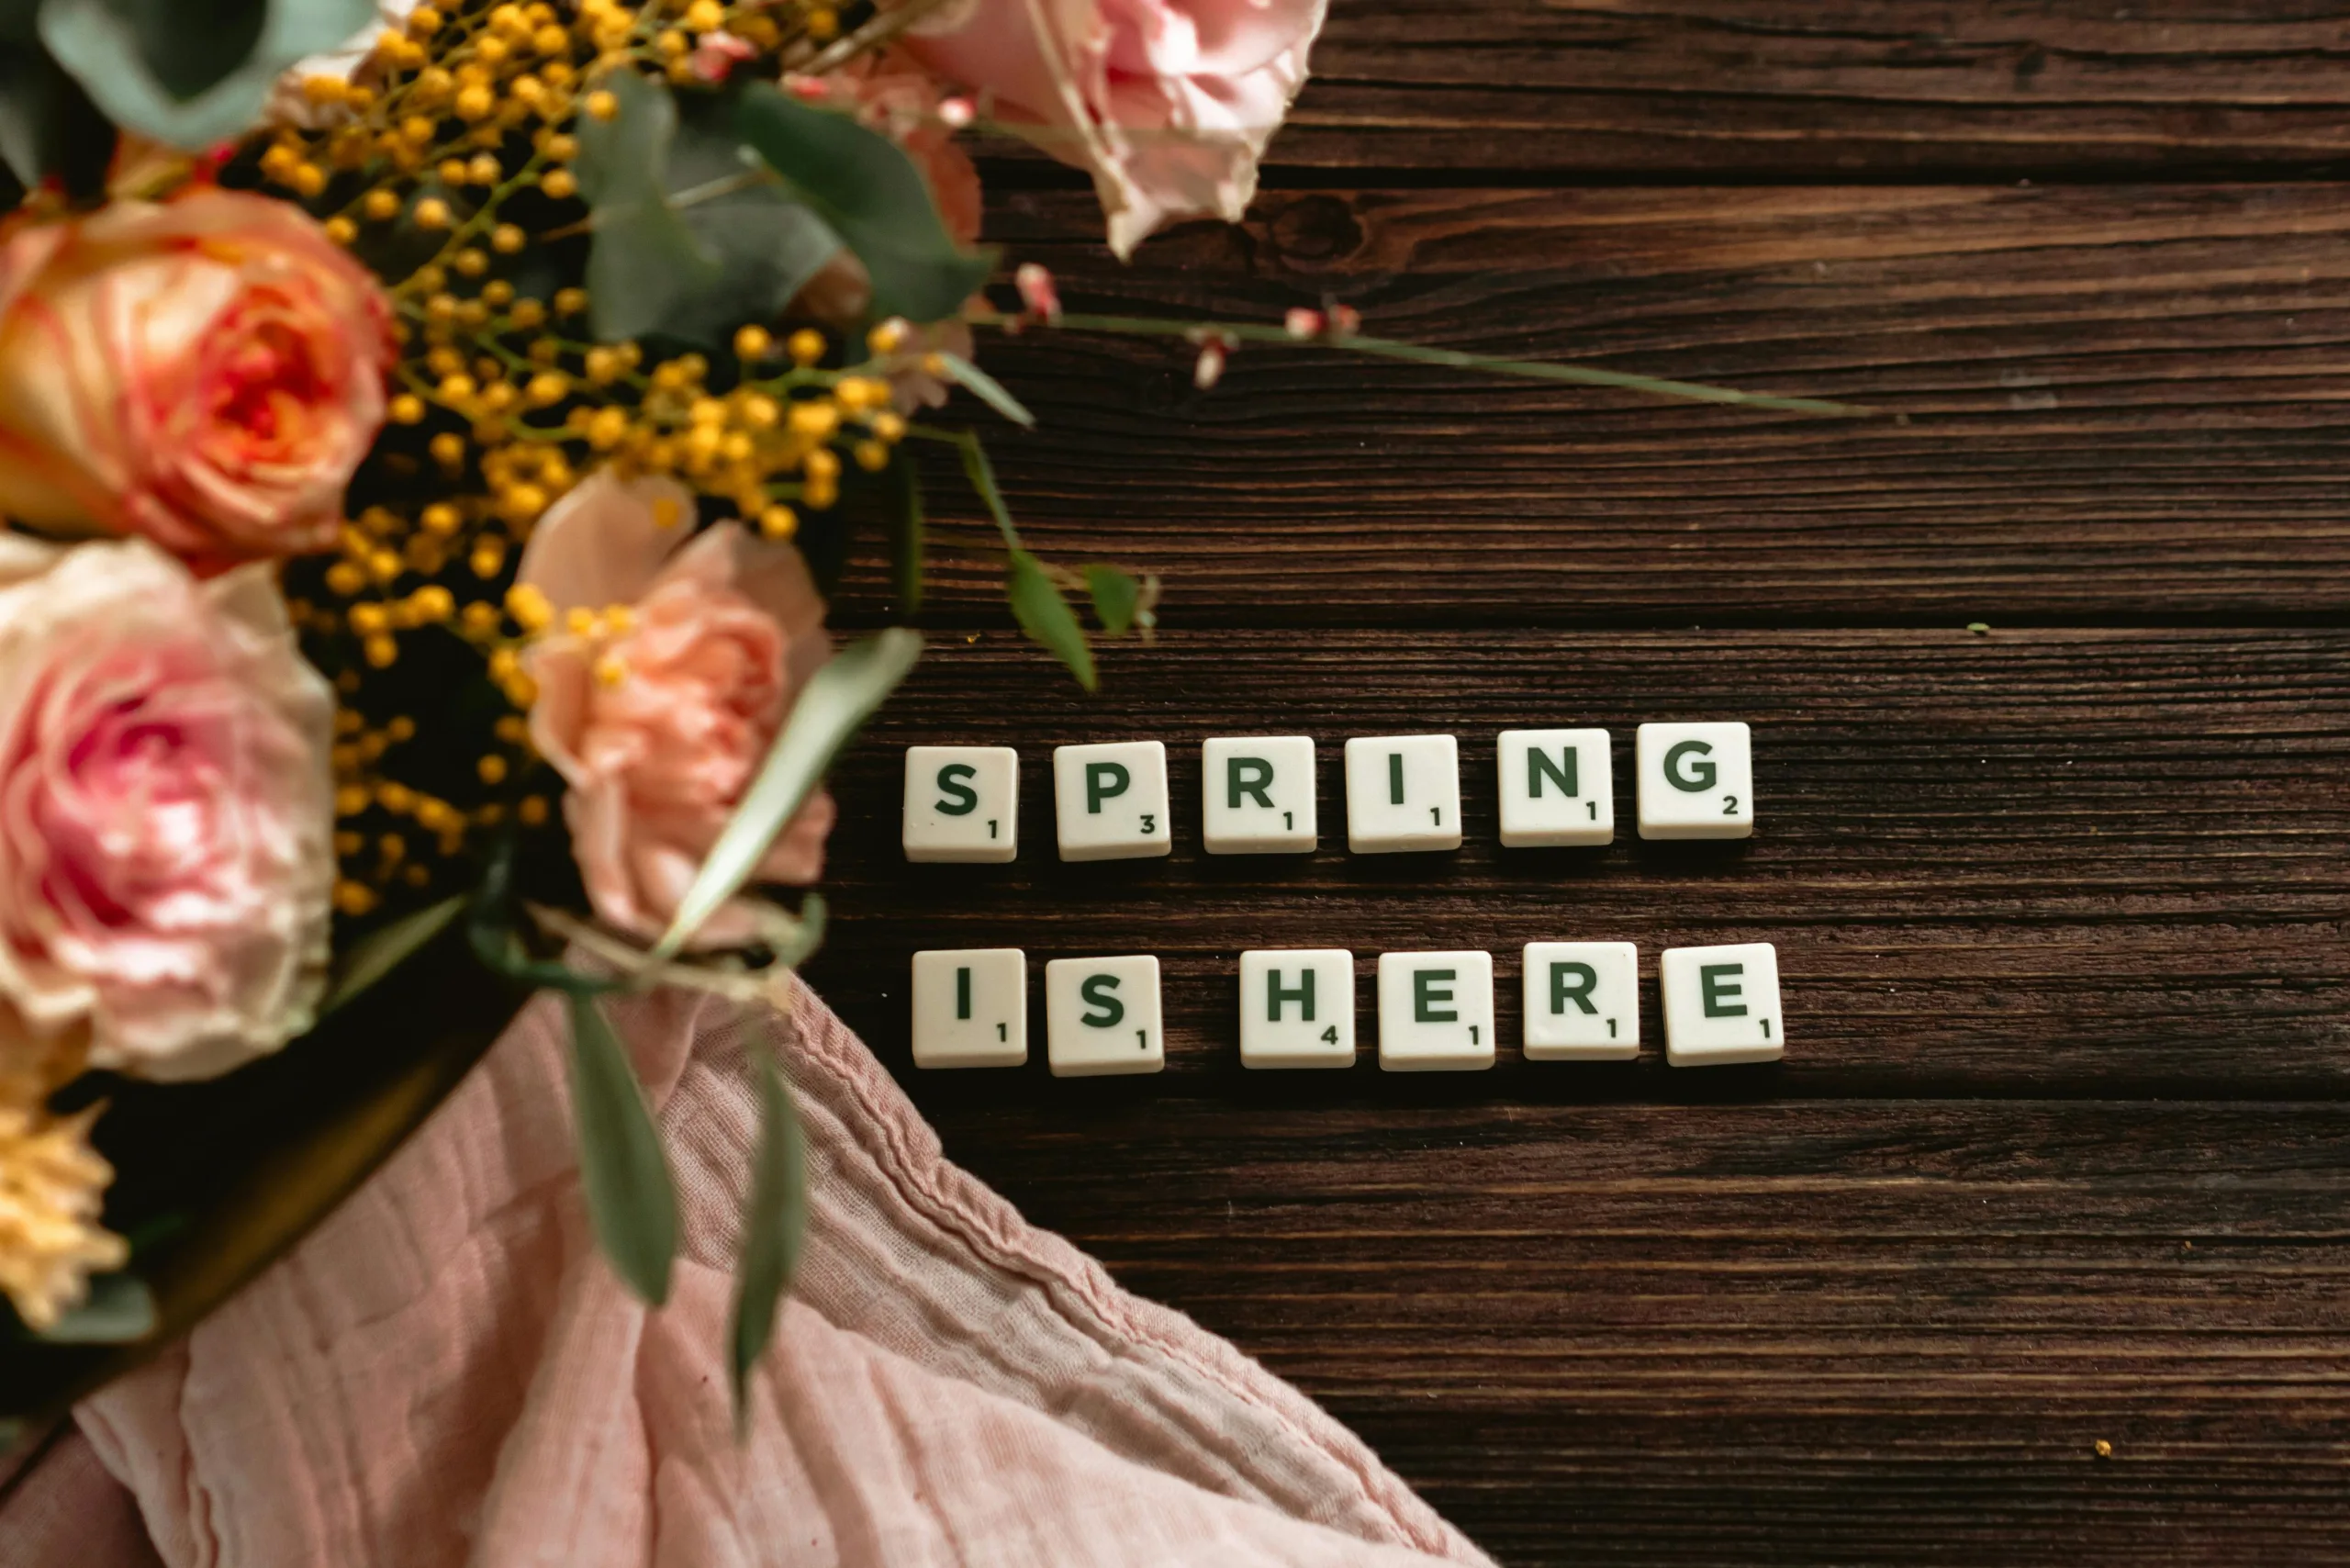 scrabble pieces spell out "spring is here" aside flowers